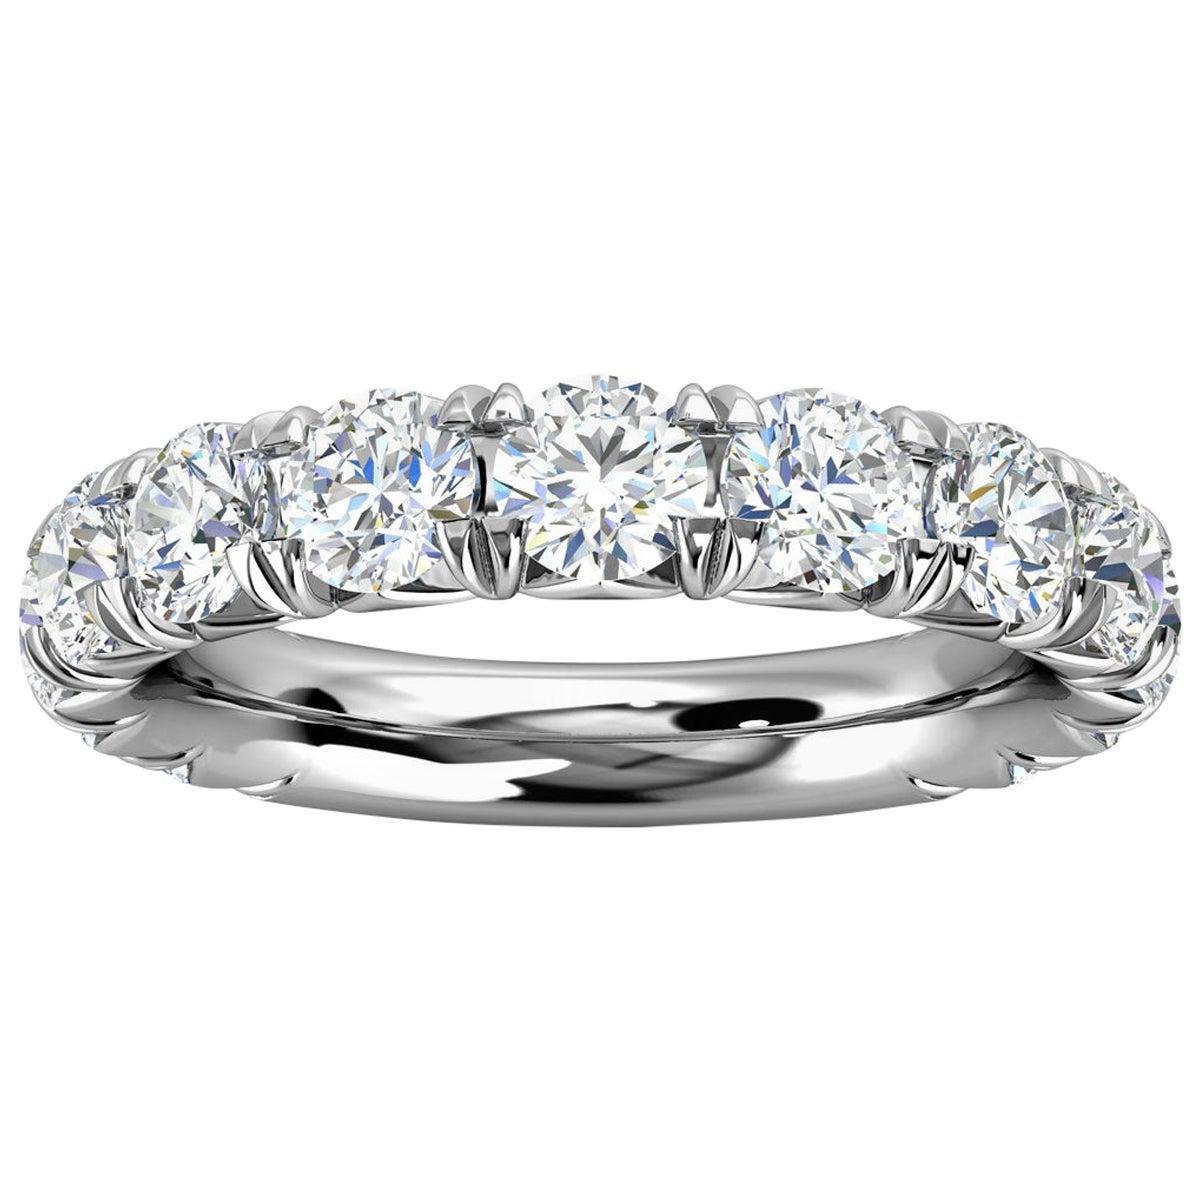 For Sale:  Platinum GIA French Pave Diamond Ring '2 Ct. tw'